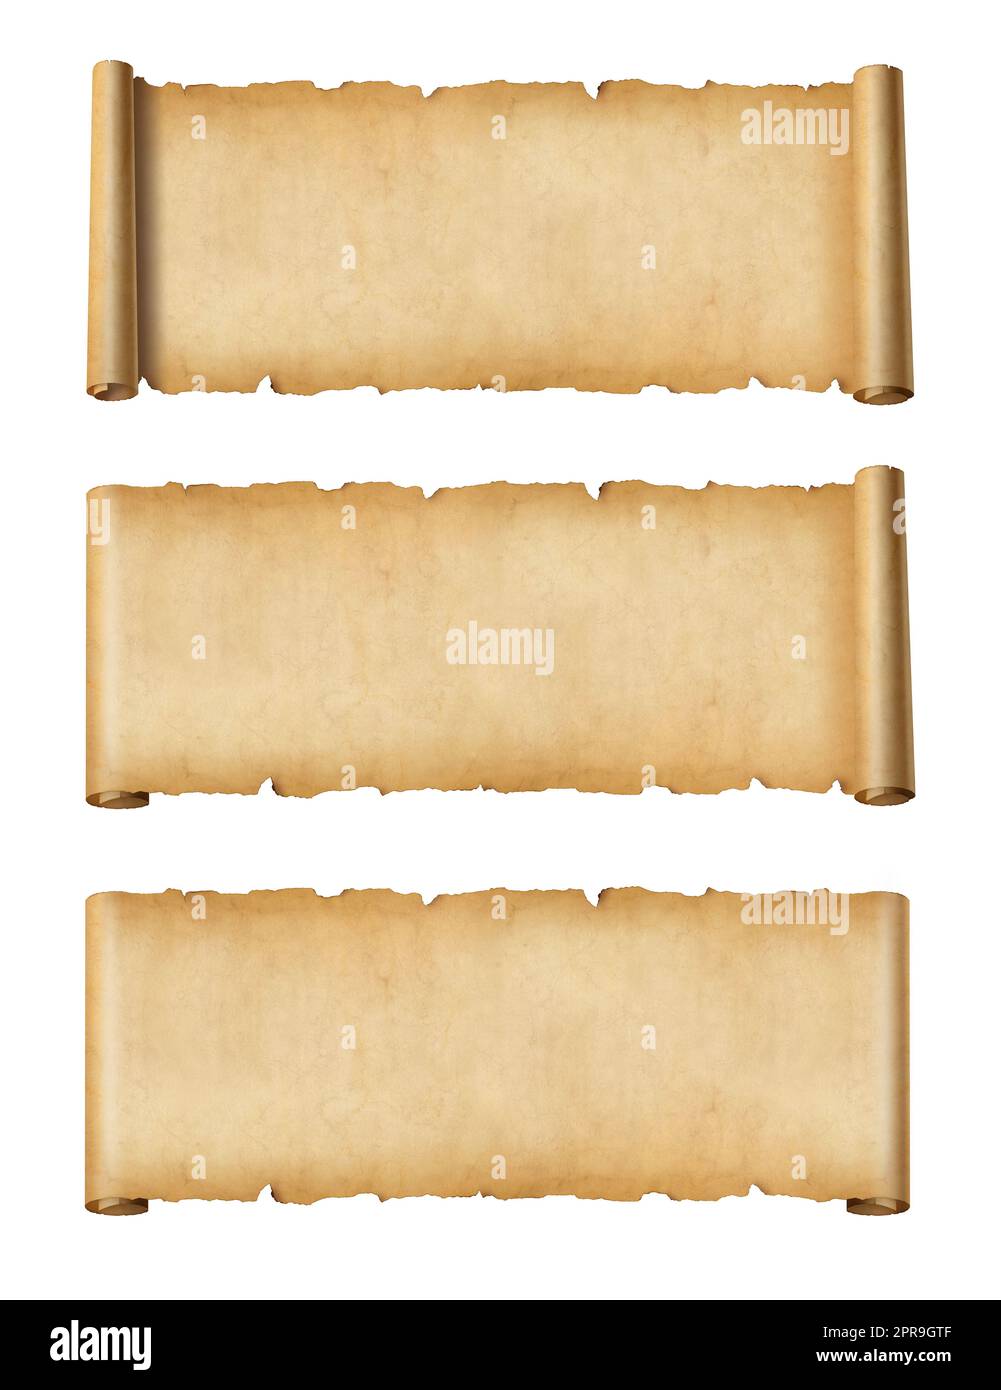 Old Parchment paper scroll set isolated on white. Horizontal banners Stock Photo